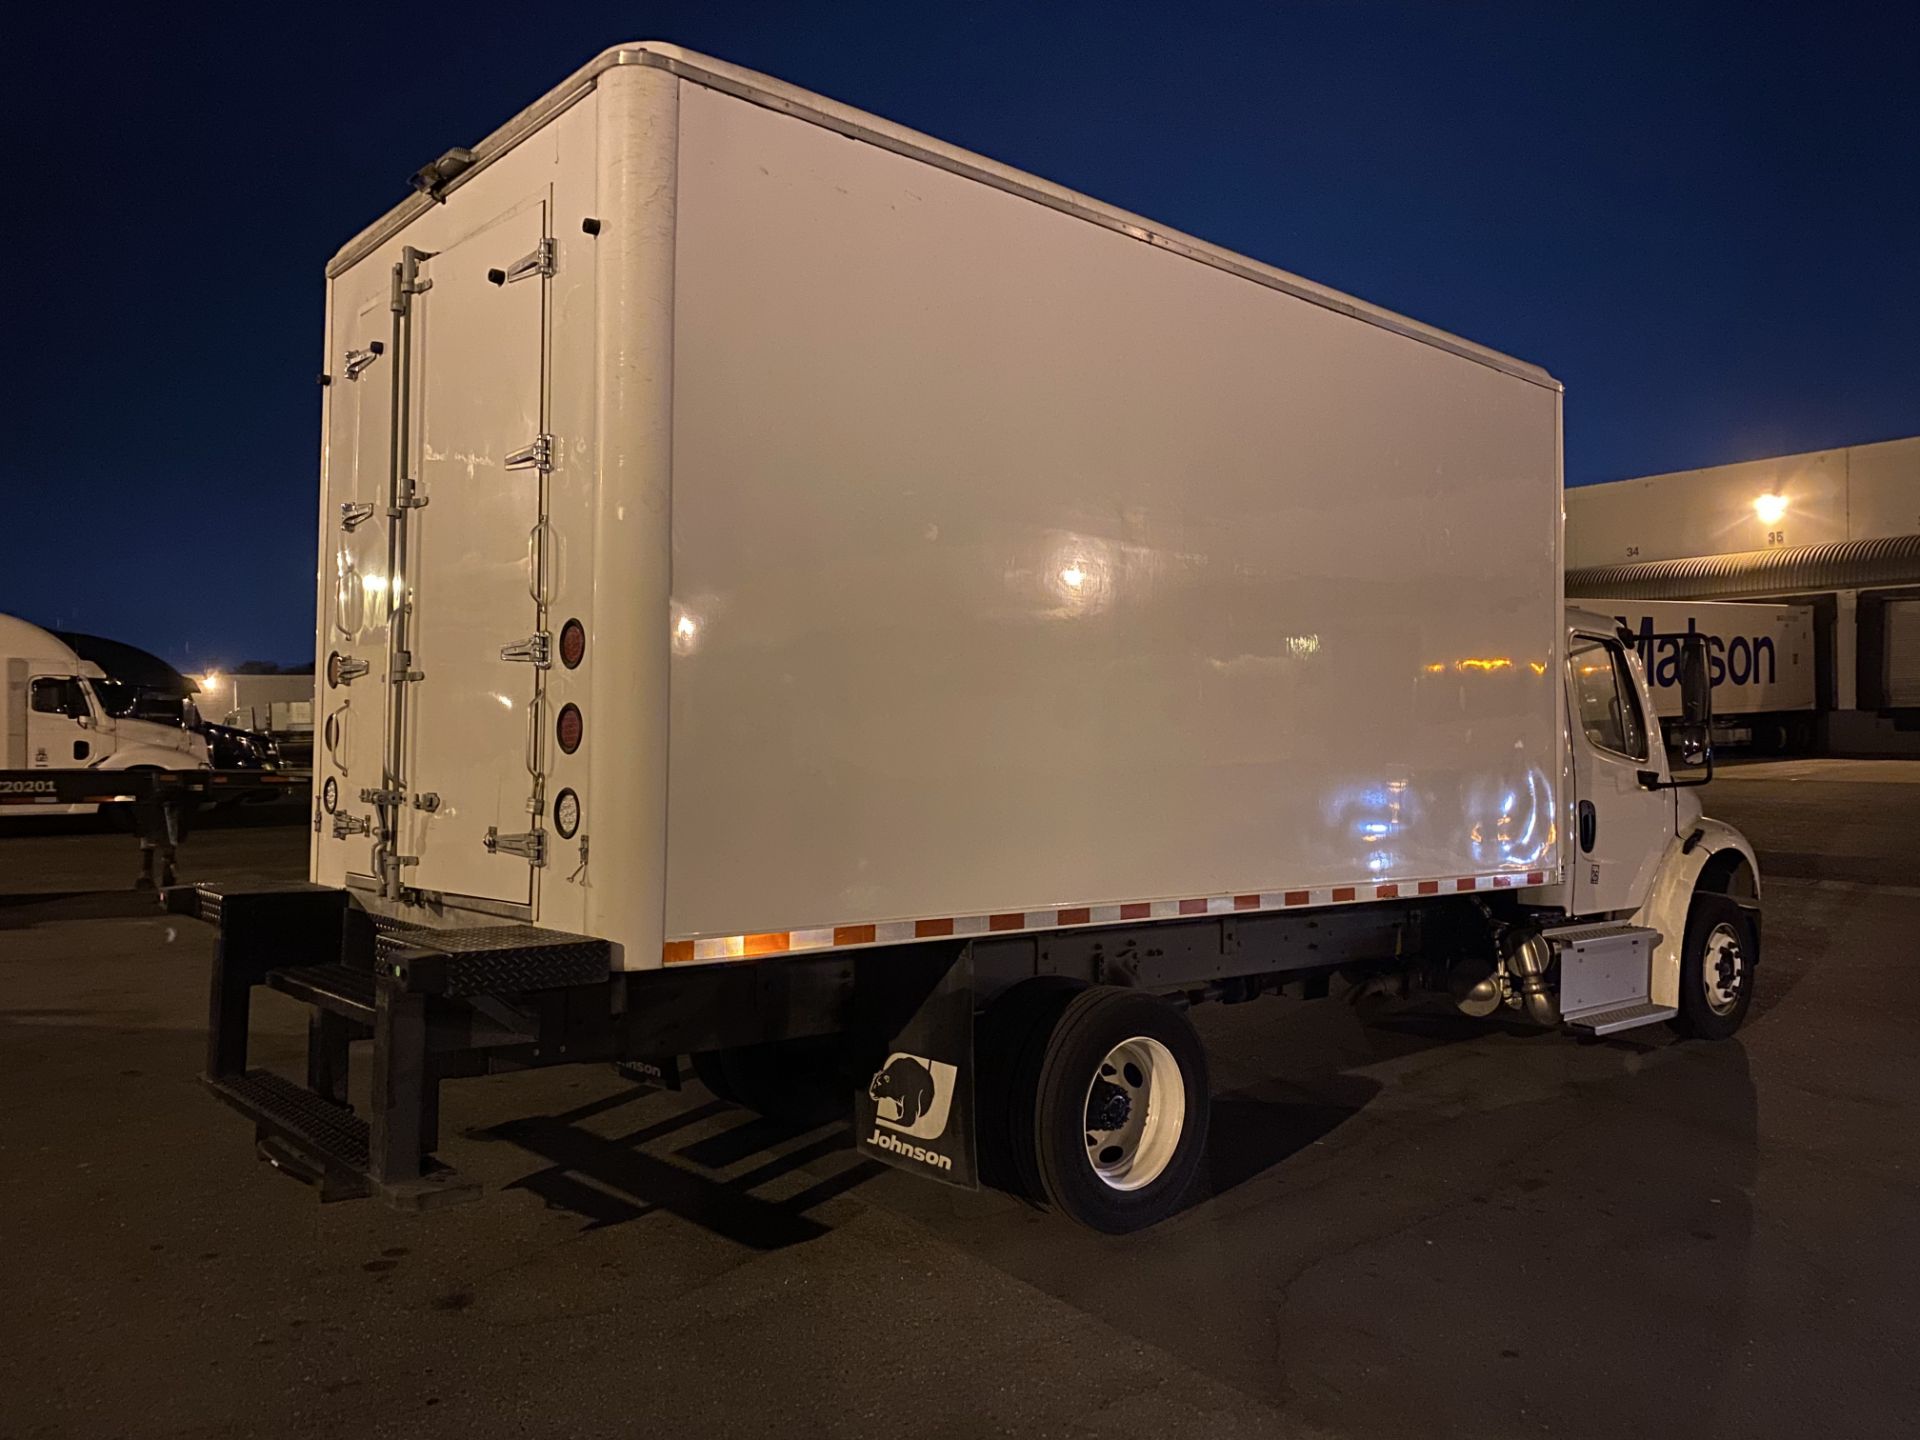 2017 Freightliner refrigerated truck - Image 3 of 9